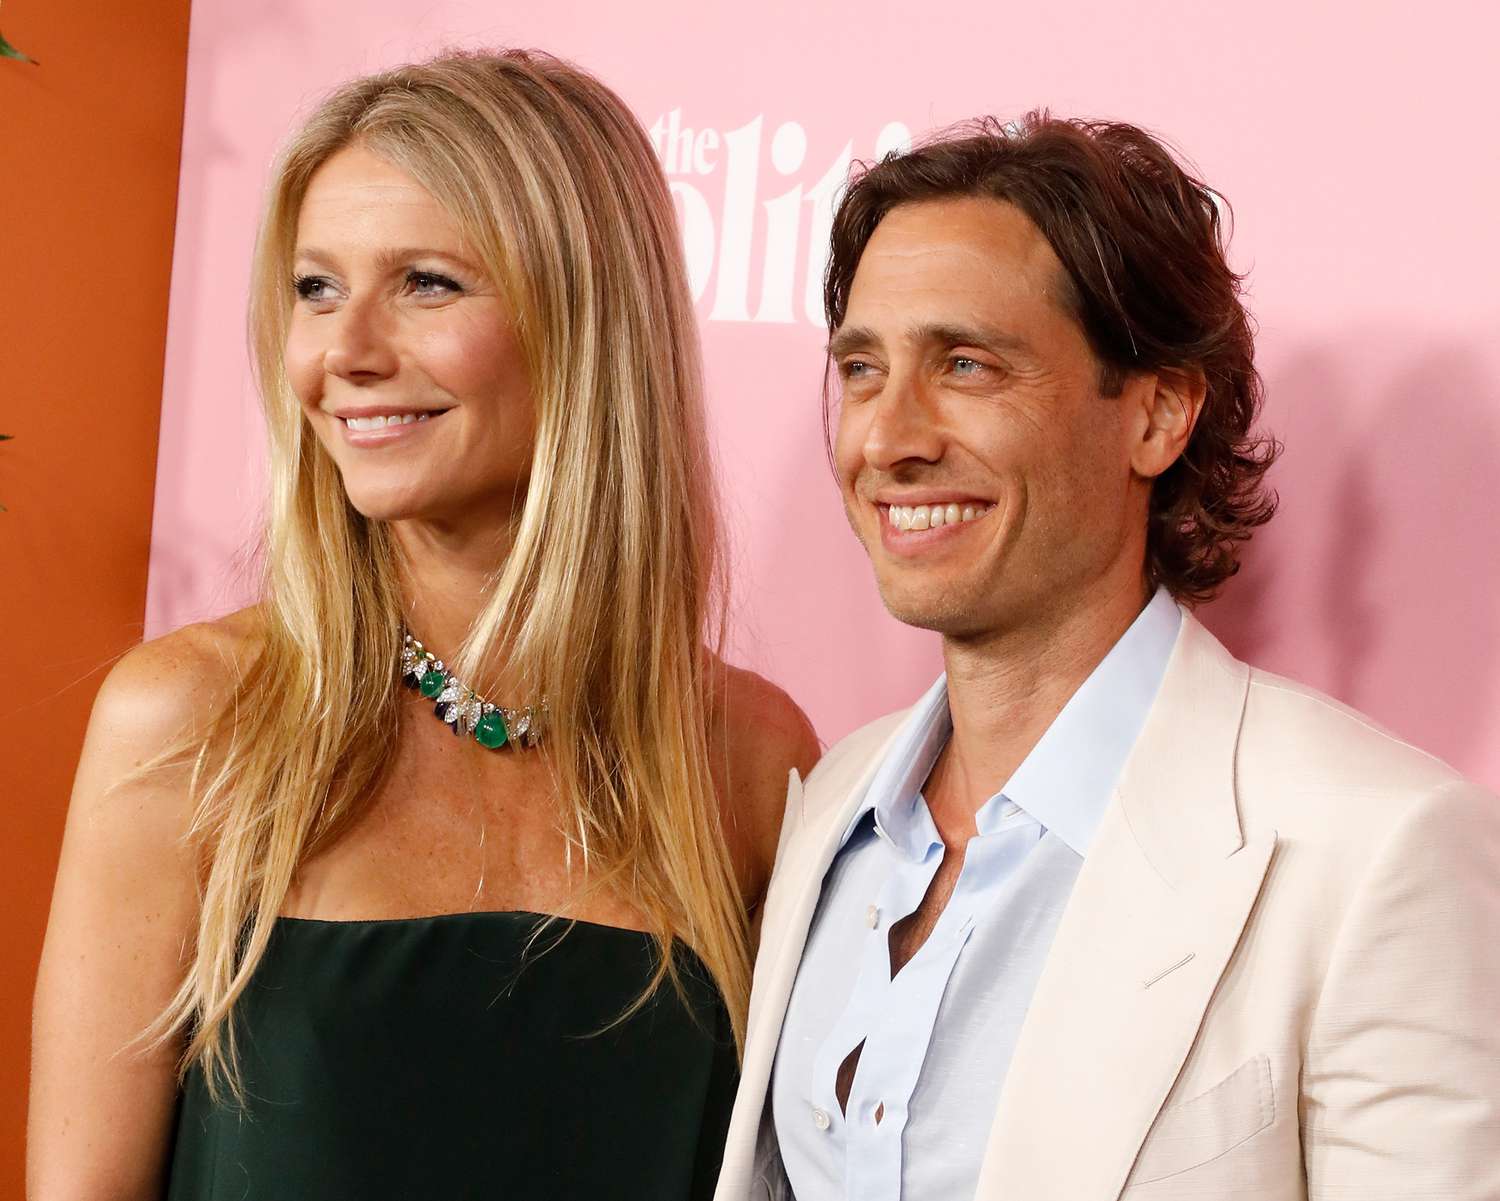 Gwyneth Paltrow and Brad Falcuk attend the premiere of Netflix's "The Politician" at DGA Theater on September 26, 2019 in New York City